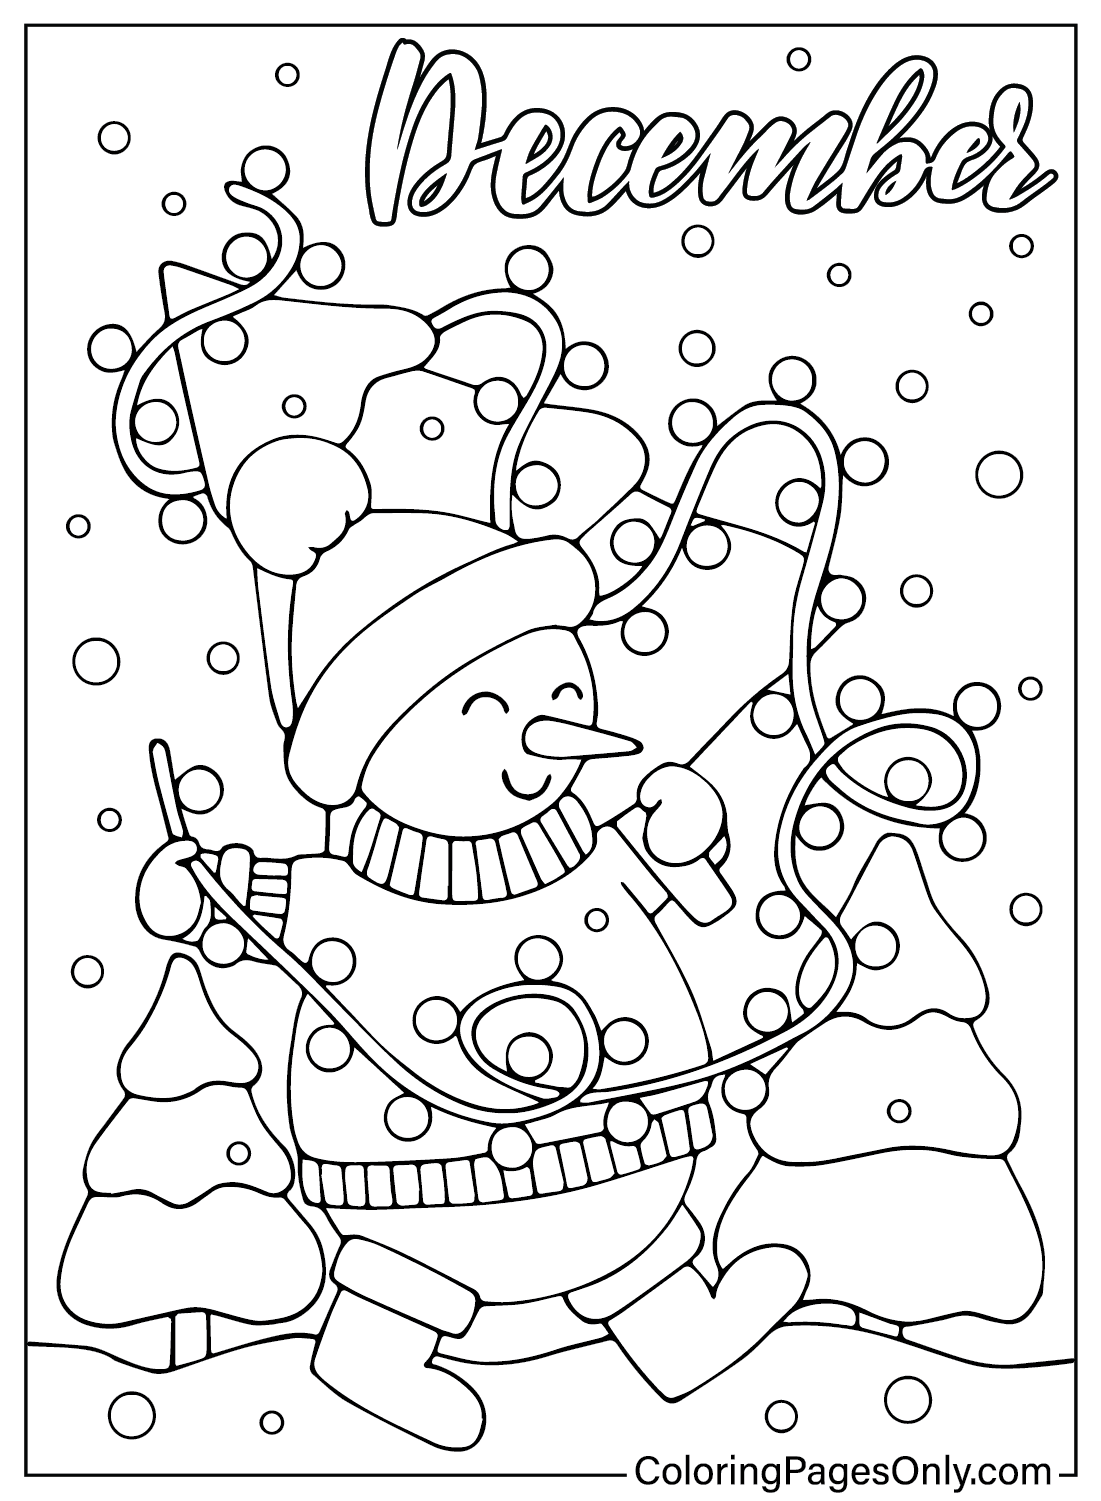 Snowman December Coloring Page